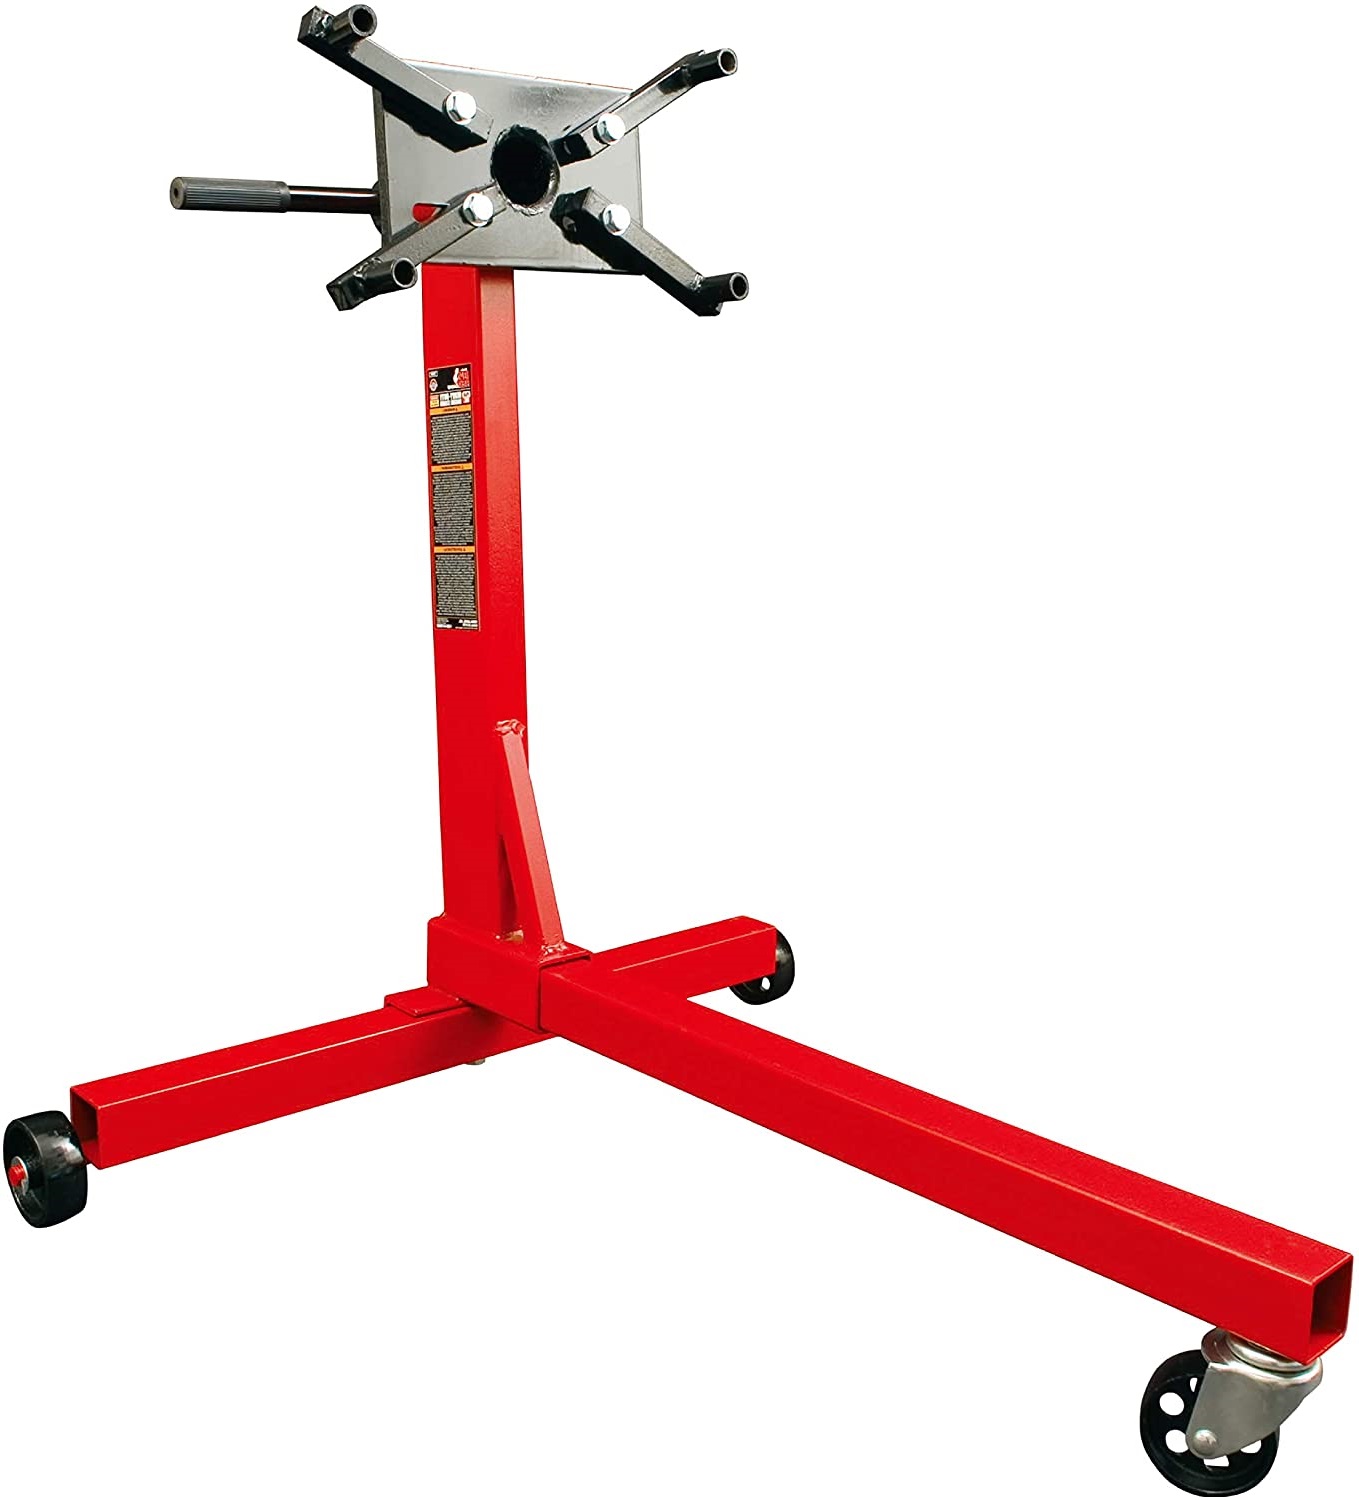 BIG RED 3/8 Ton (750 lb) Steel Rotating Engine Stand with 360 Degree Rotating Head, Red, T23401 - image 1 of 8